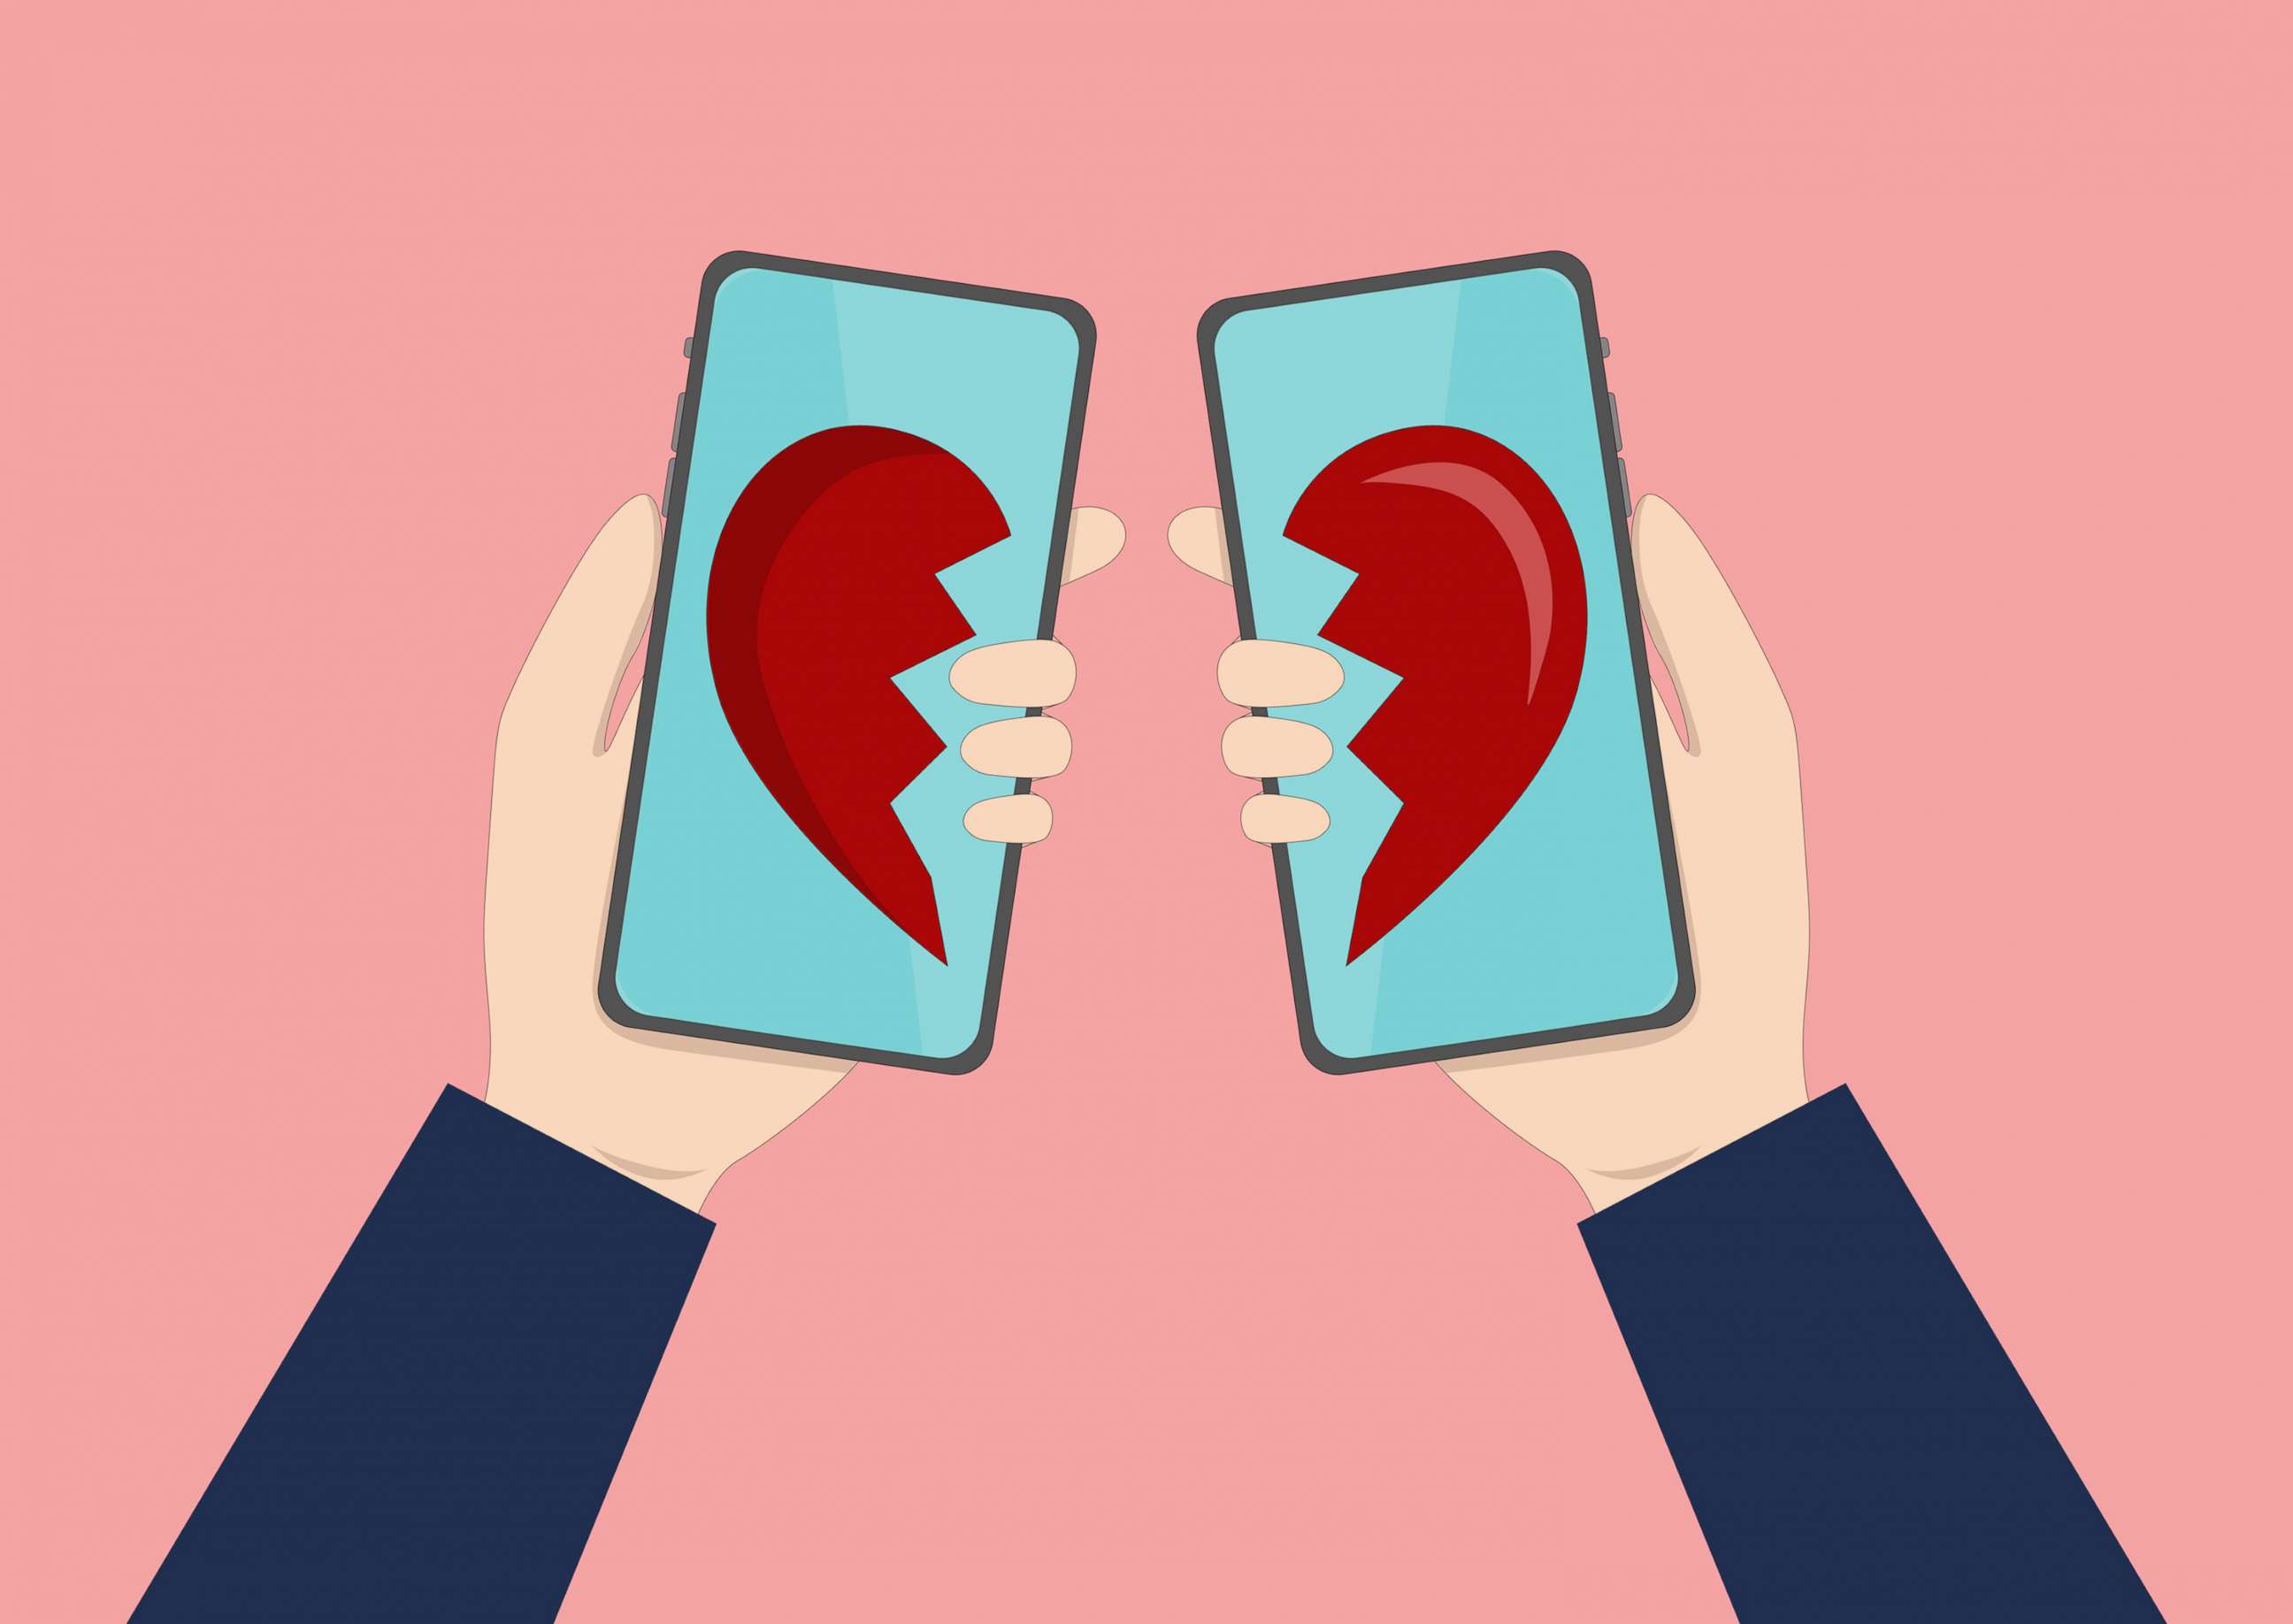 PHOTO: In this illustration, a broken heart is shown on two cell phones.